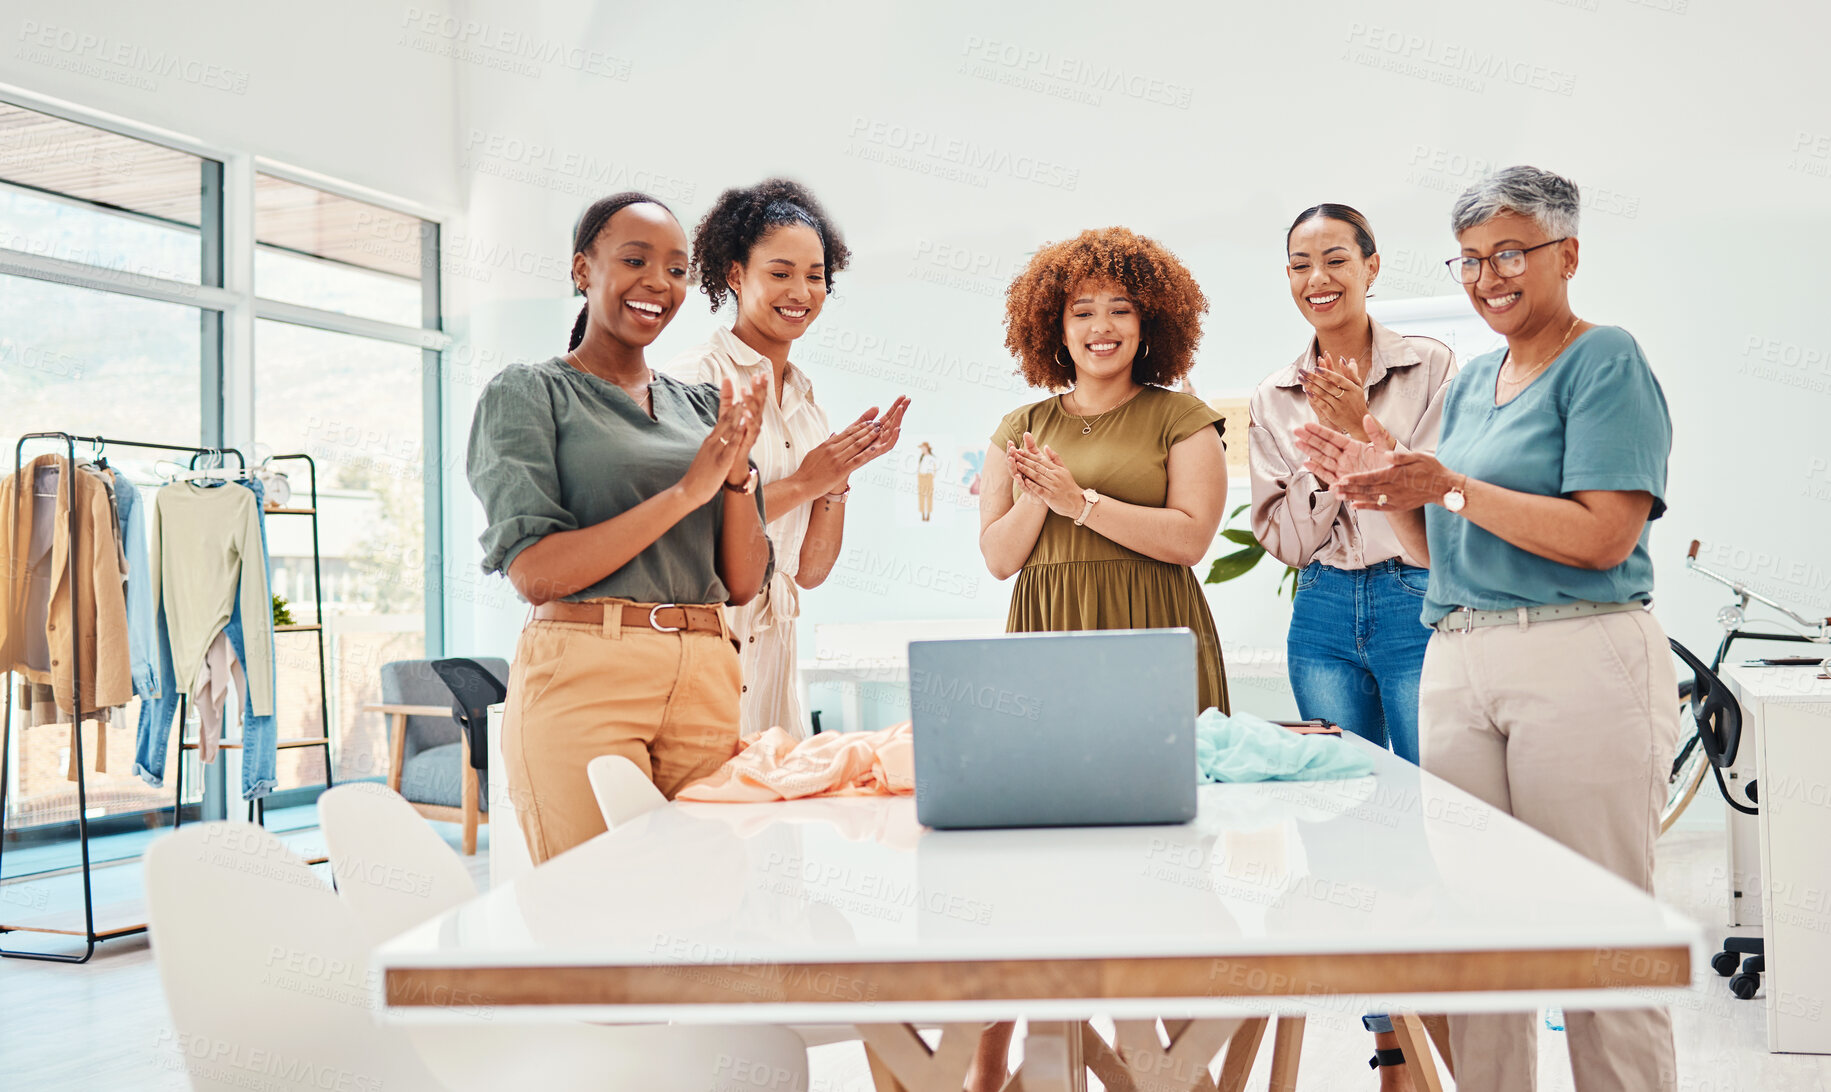 Buy stock photo Success, happy people or applause in meeting for fashion design bonus, growth or achievement. Laptop, proud or designers clapping hands in celebration of teamwork, goal target or promotion in startup